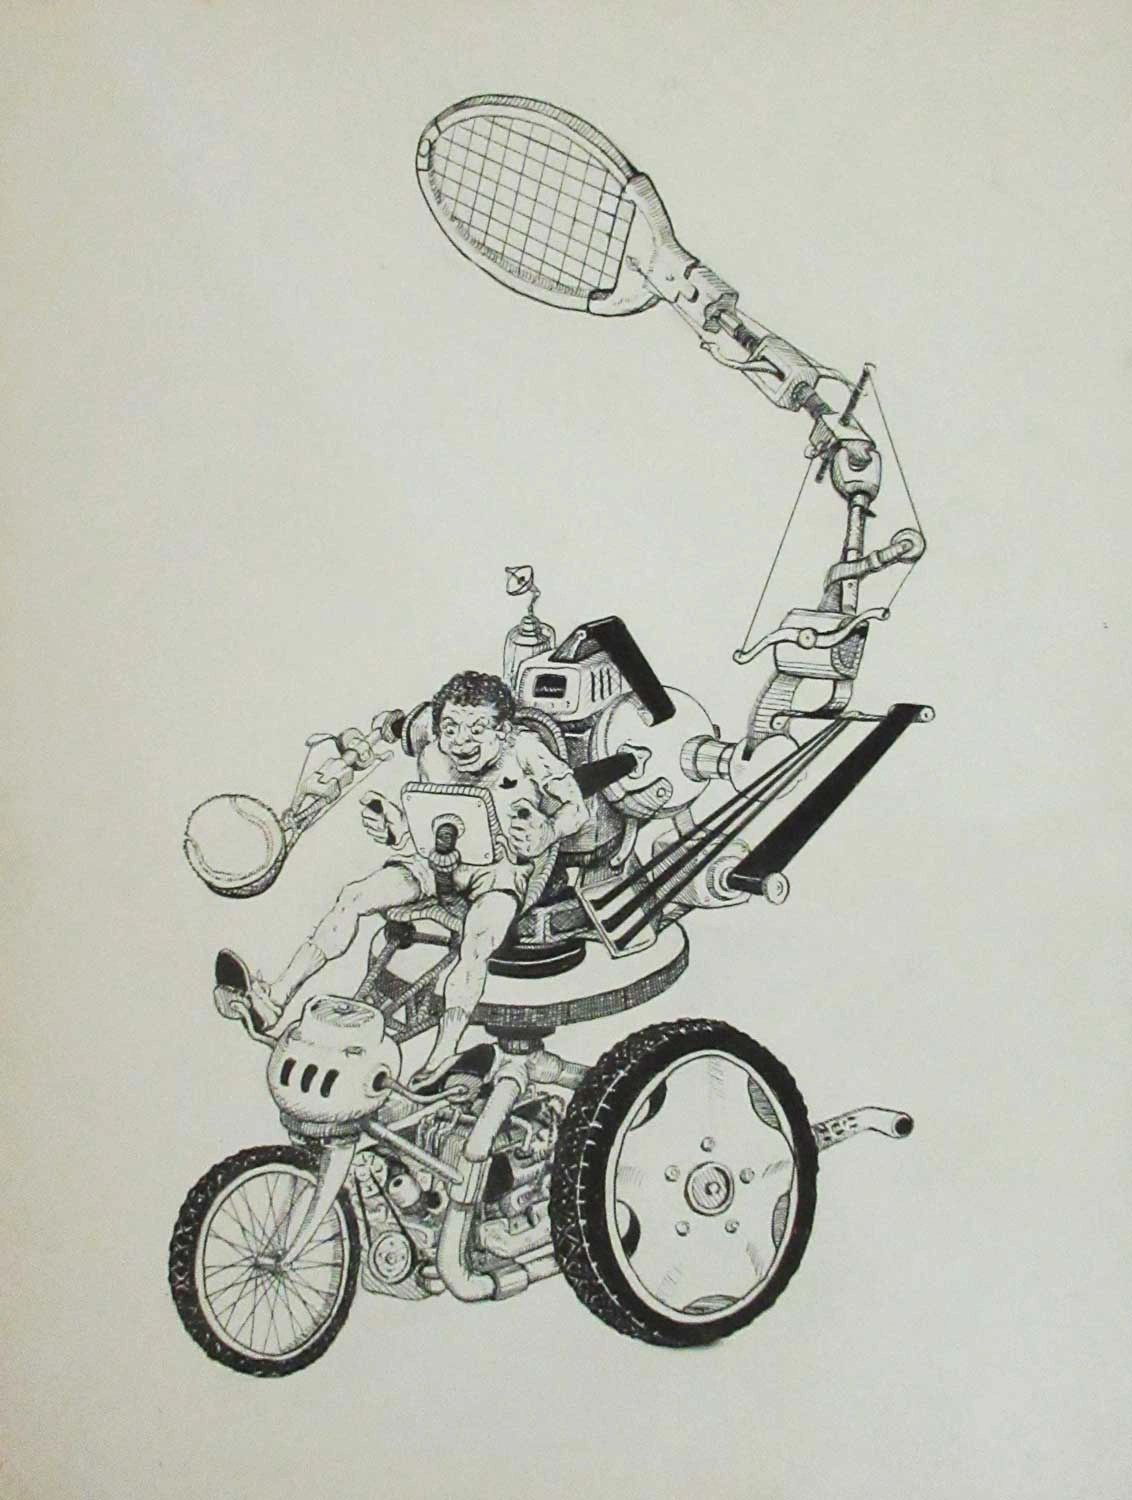 Pen and ink drawing of a motorized tennis machine.